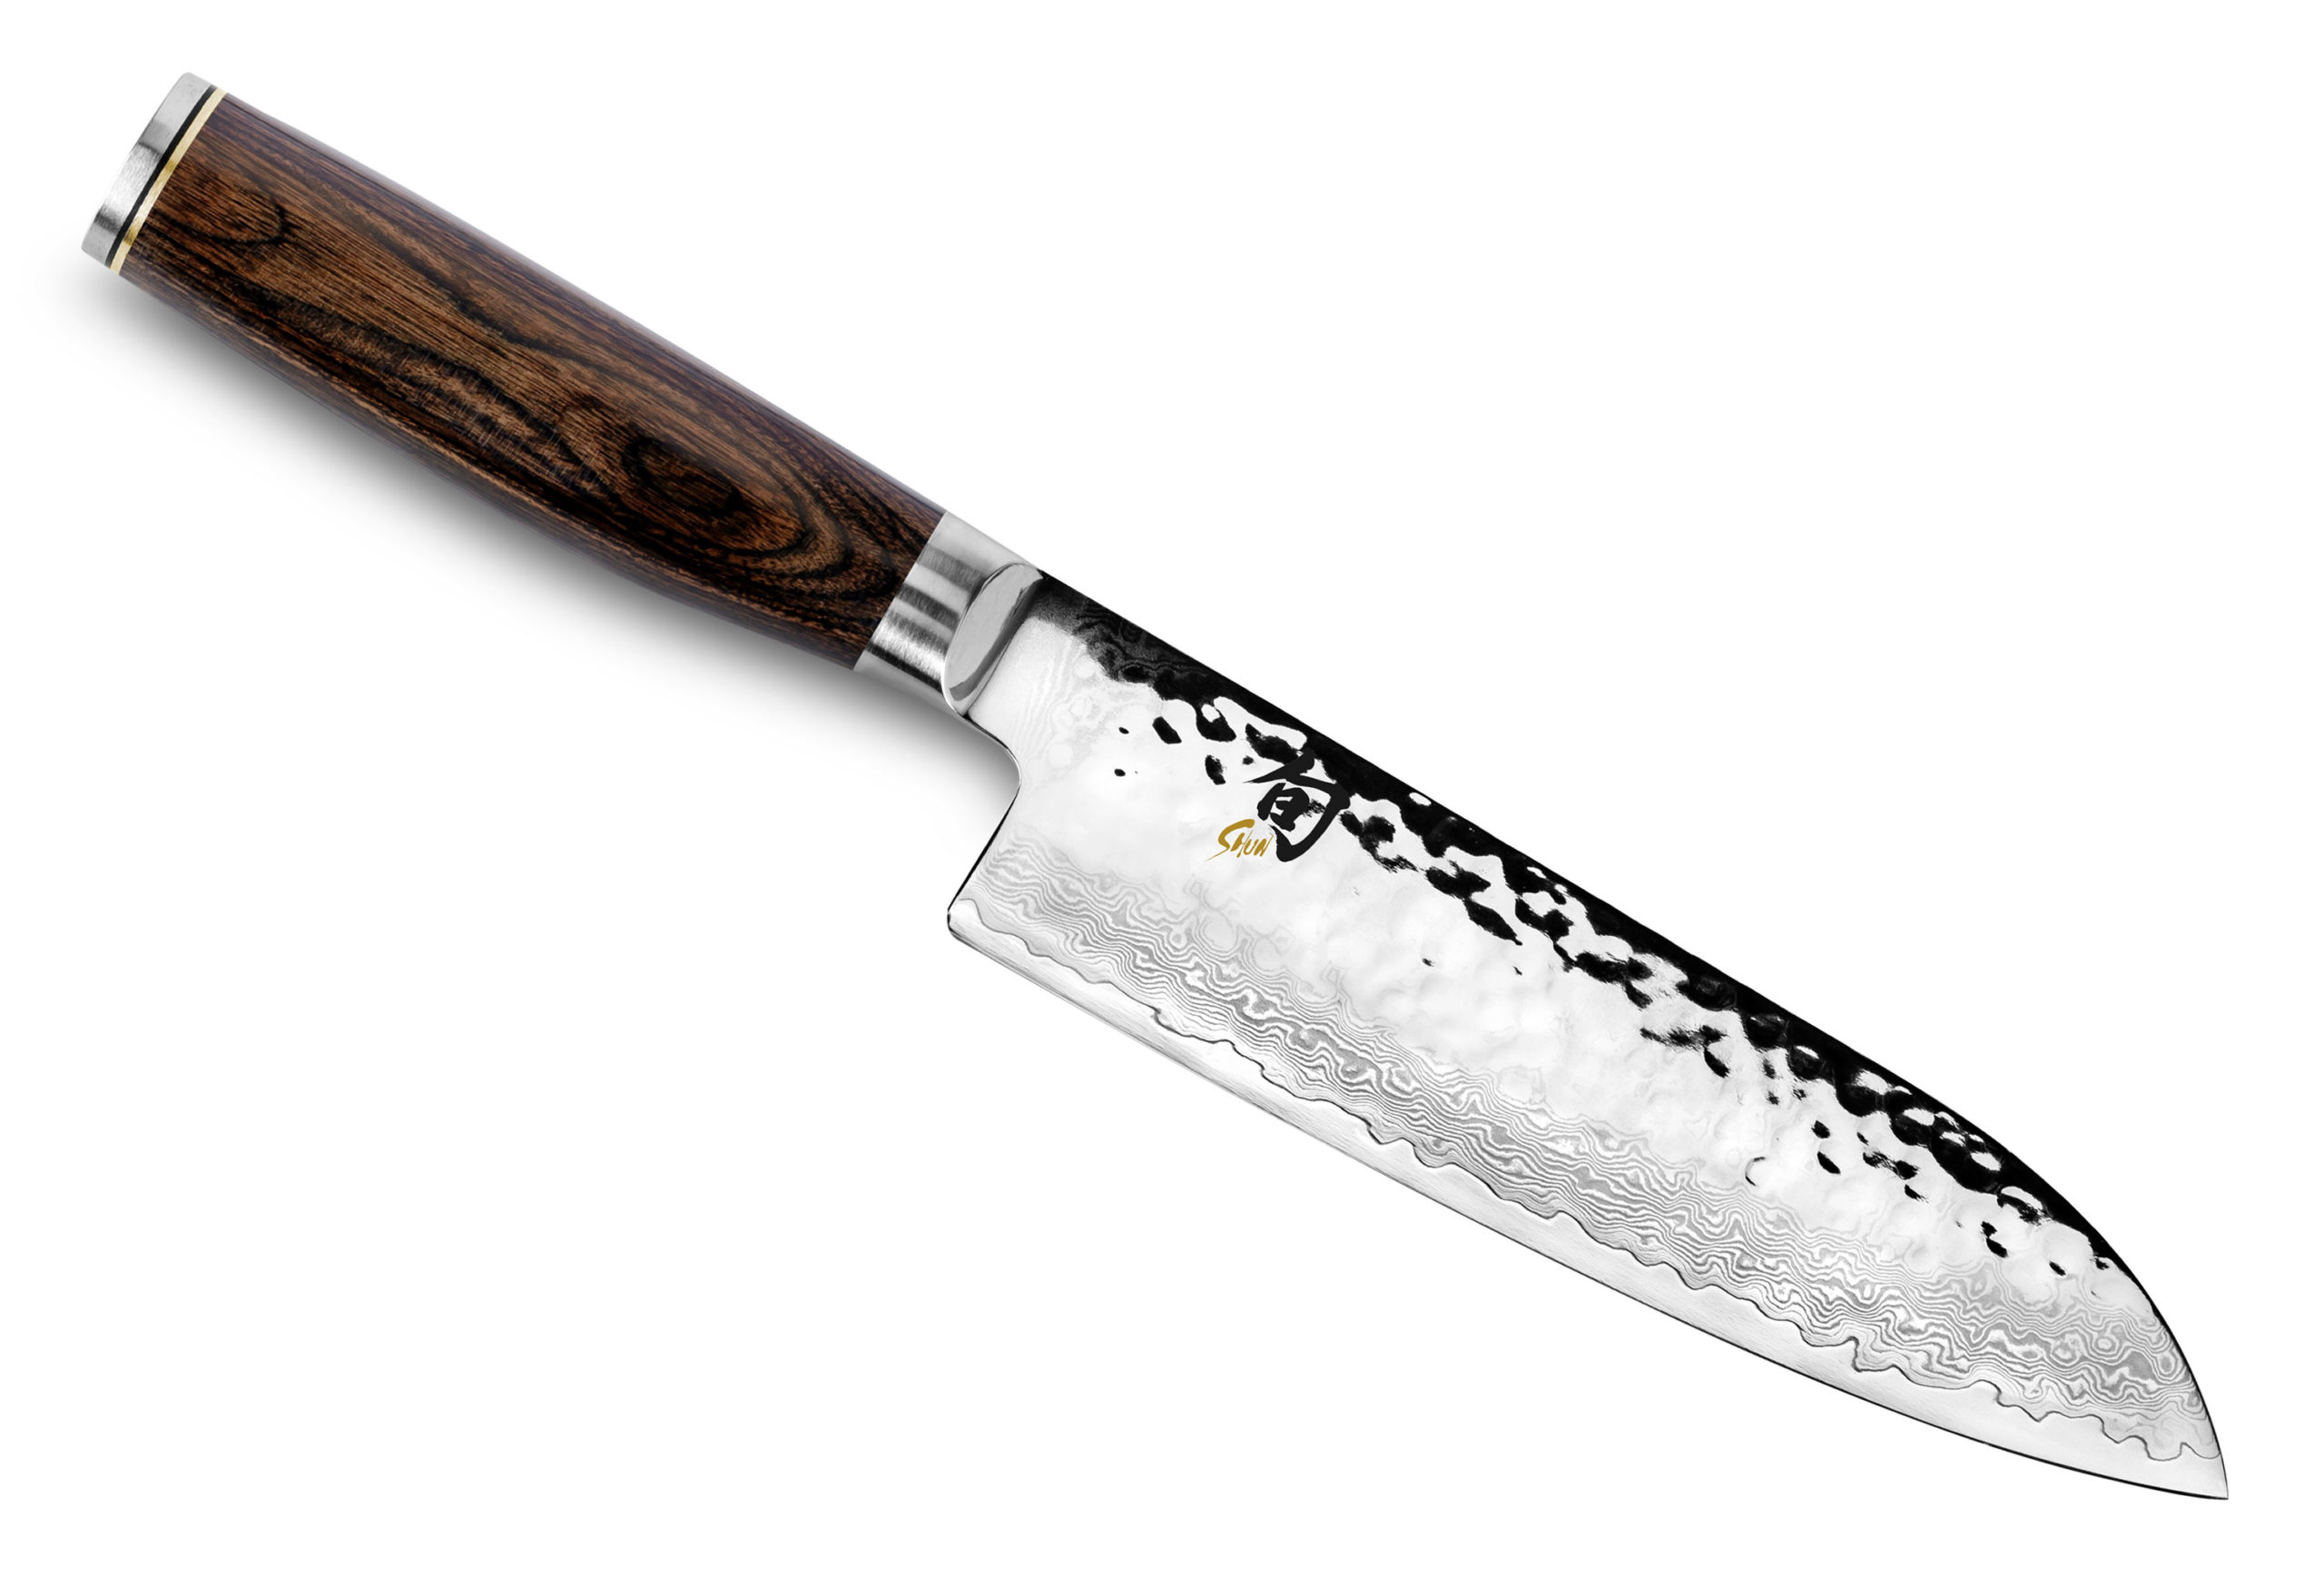 What is a Santoku knife use for?